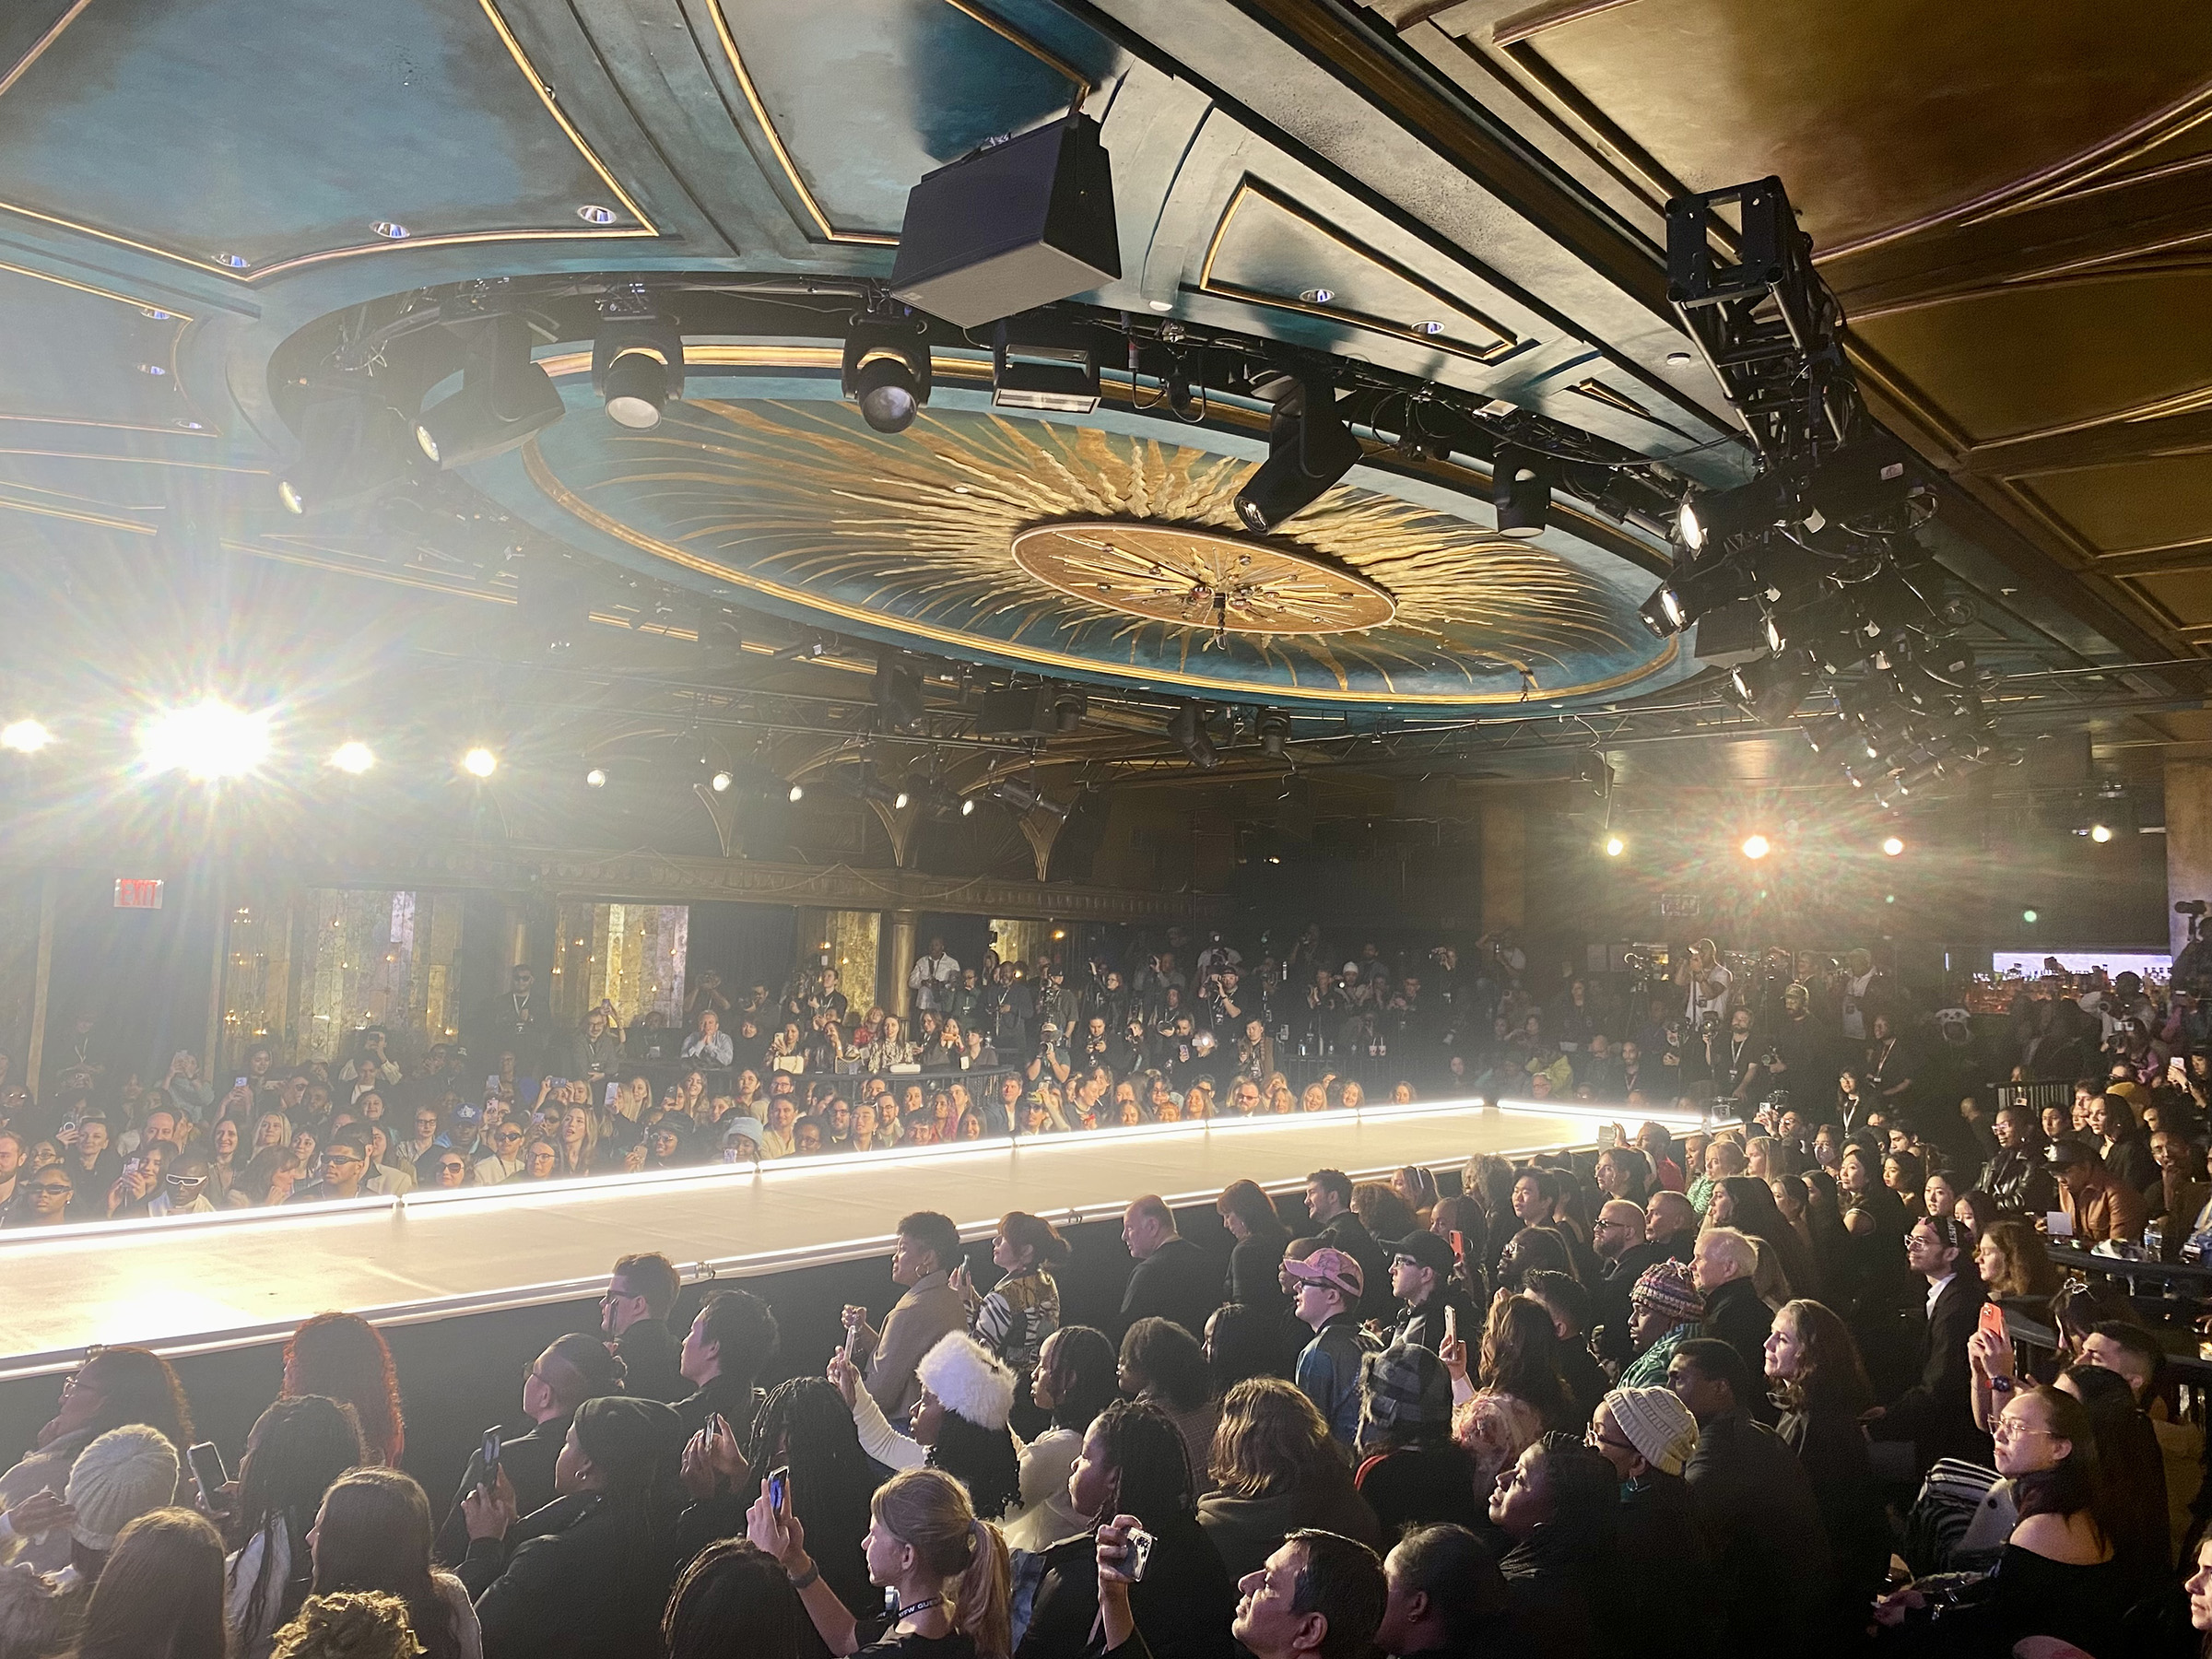 Myles Mangino Sets Stage For Runway 7 During New York Fashion Week with CHAUVET Professional